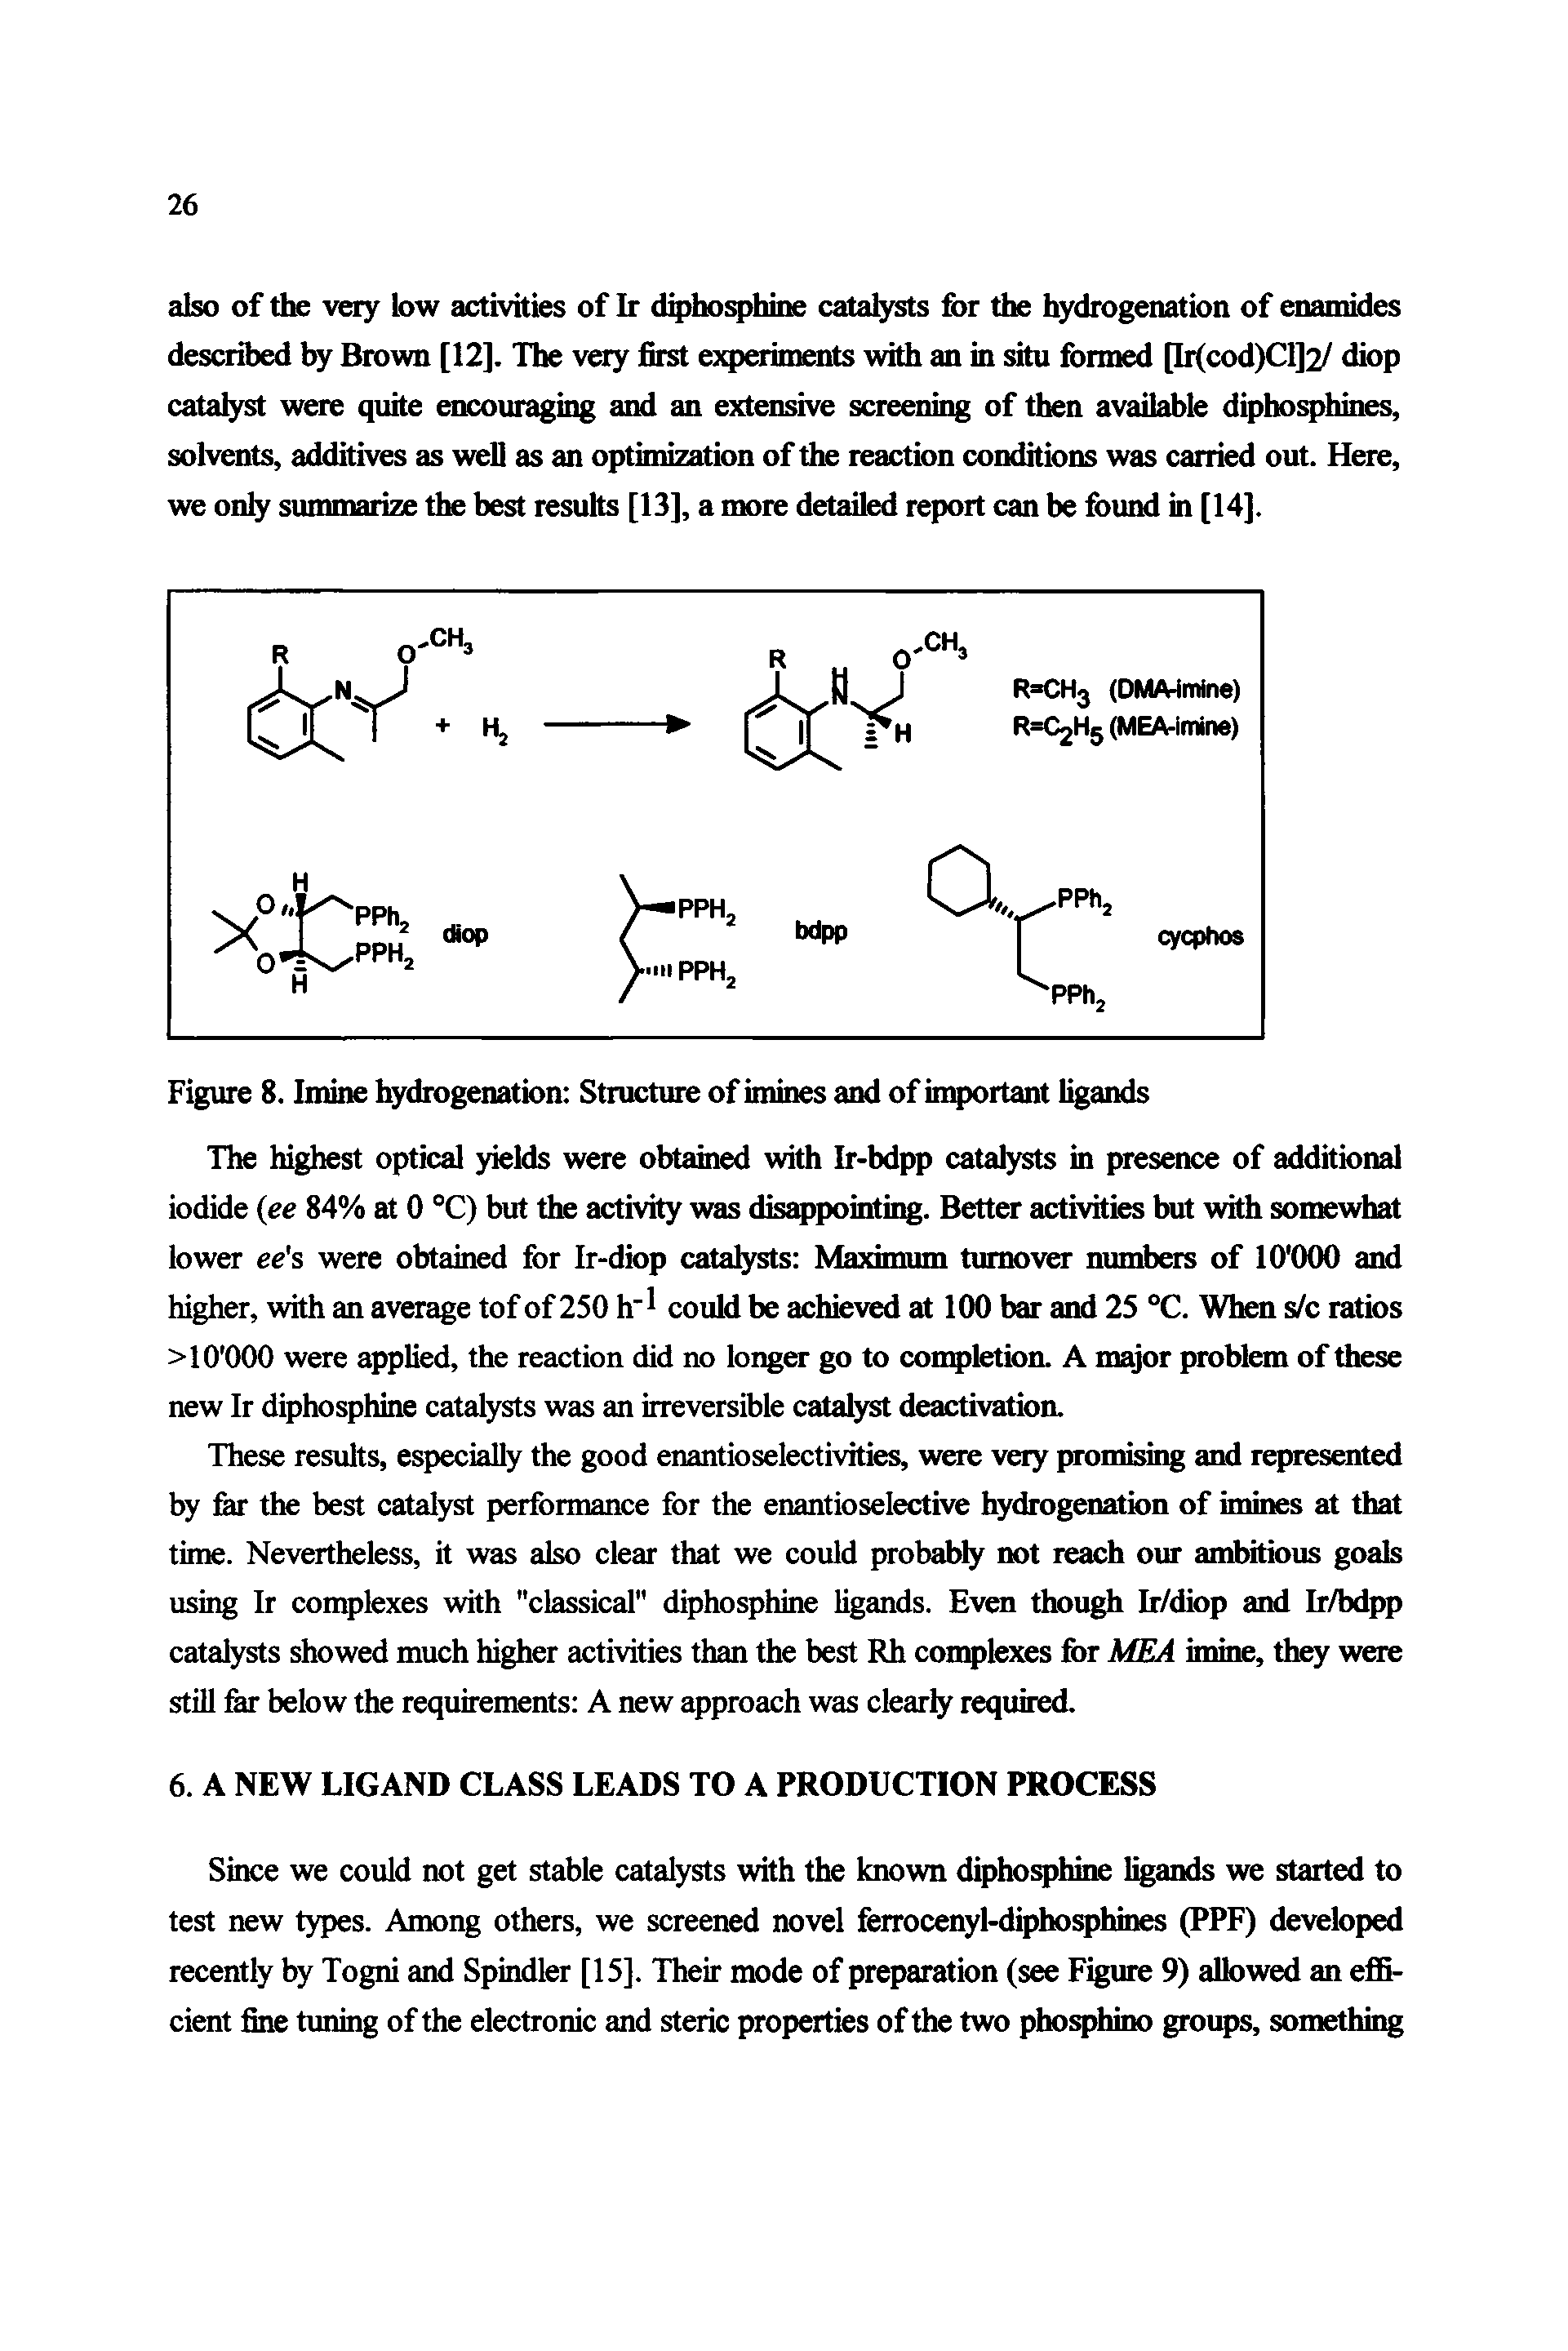 Figure 8. Imine hydrogenation Structure of imines and of important ligands...